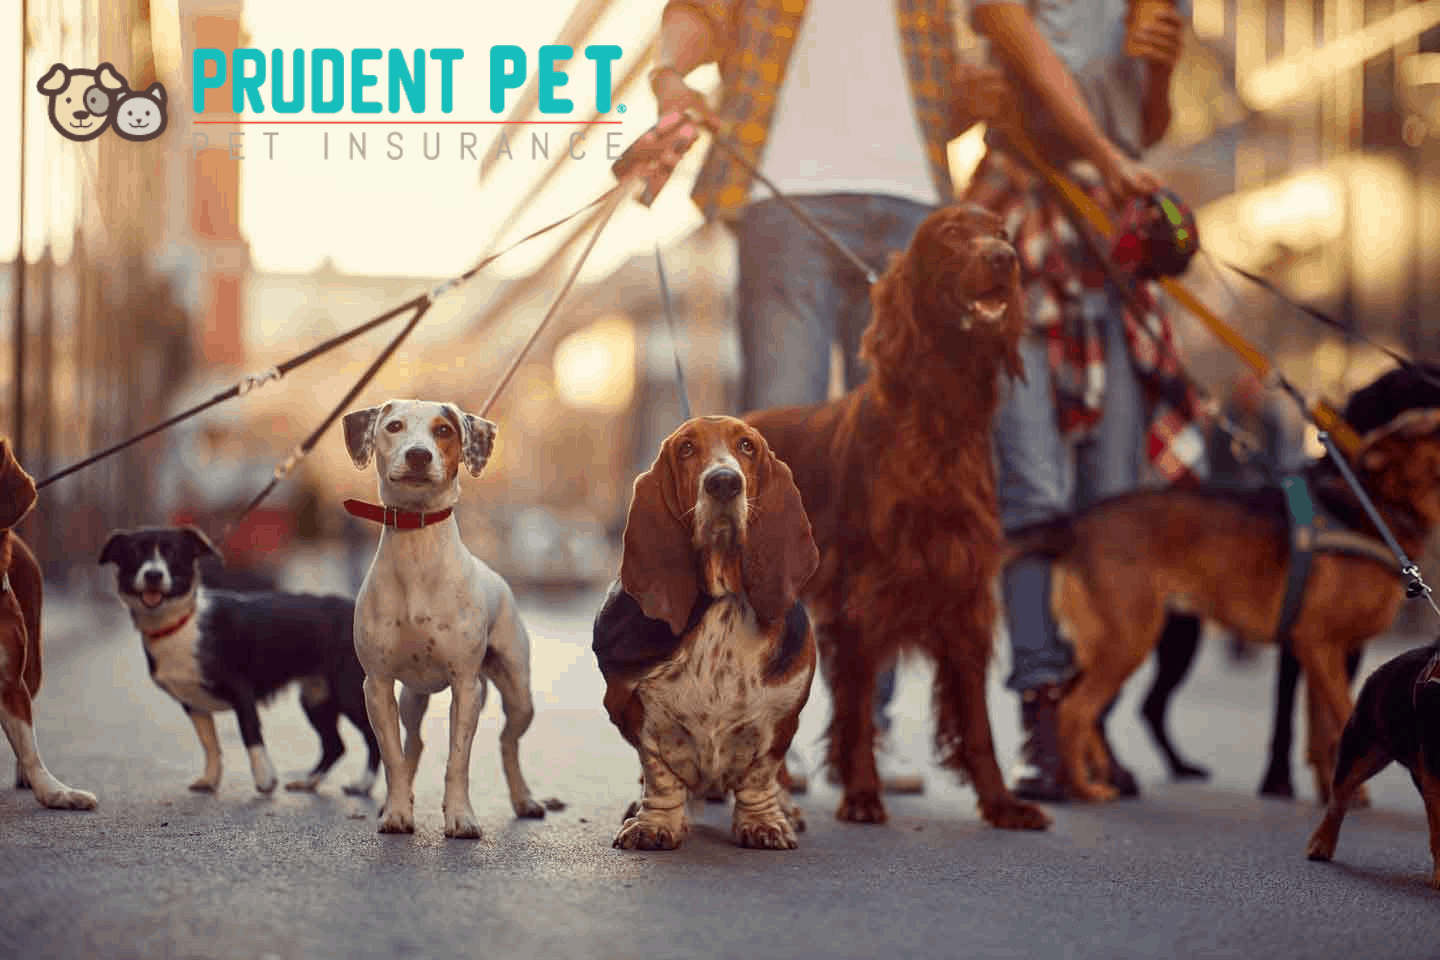 Prudent Pet pet insurance review featuring two persons walking 8 different dogs